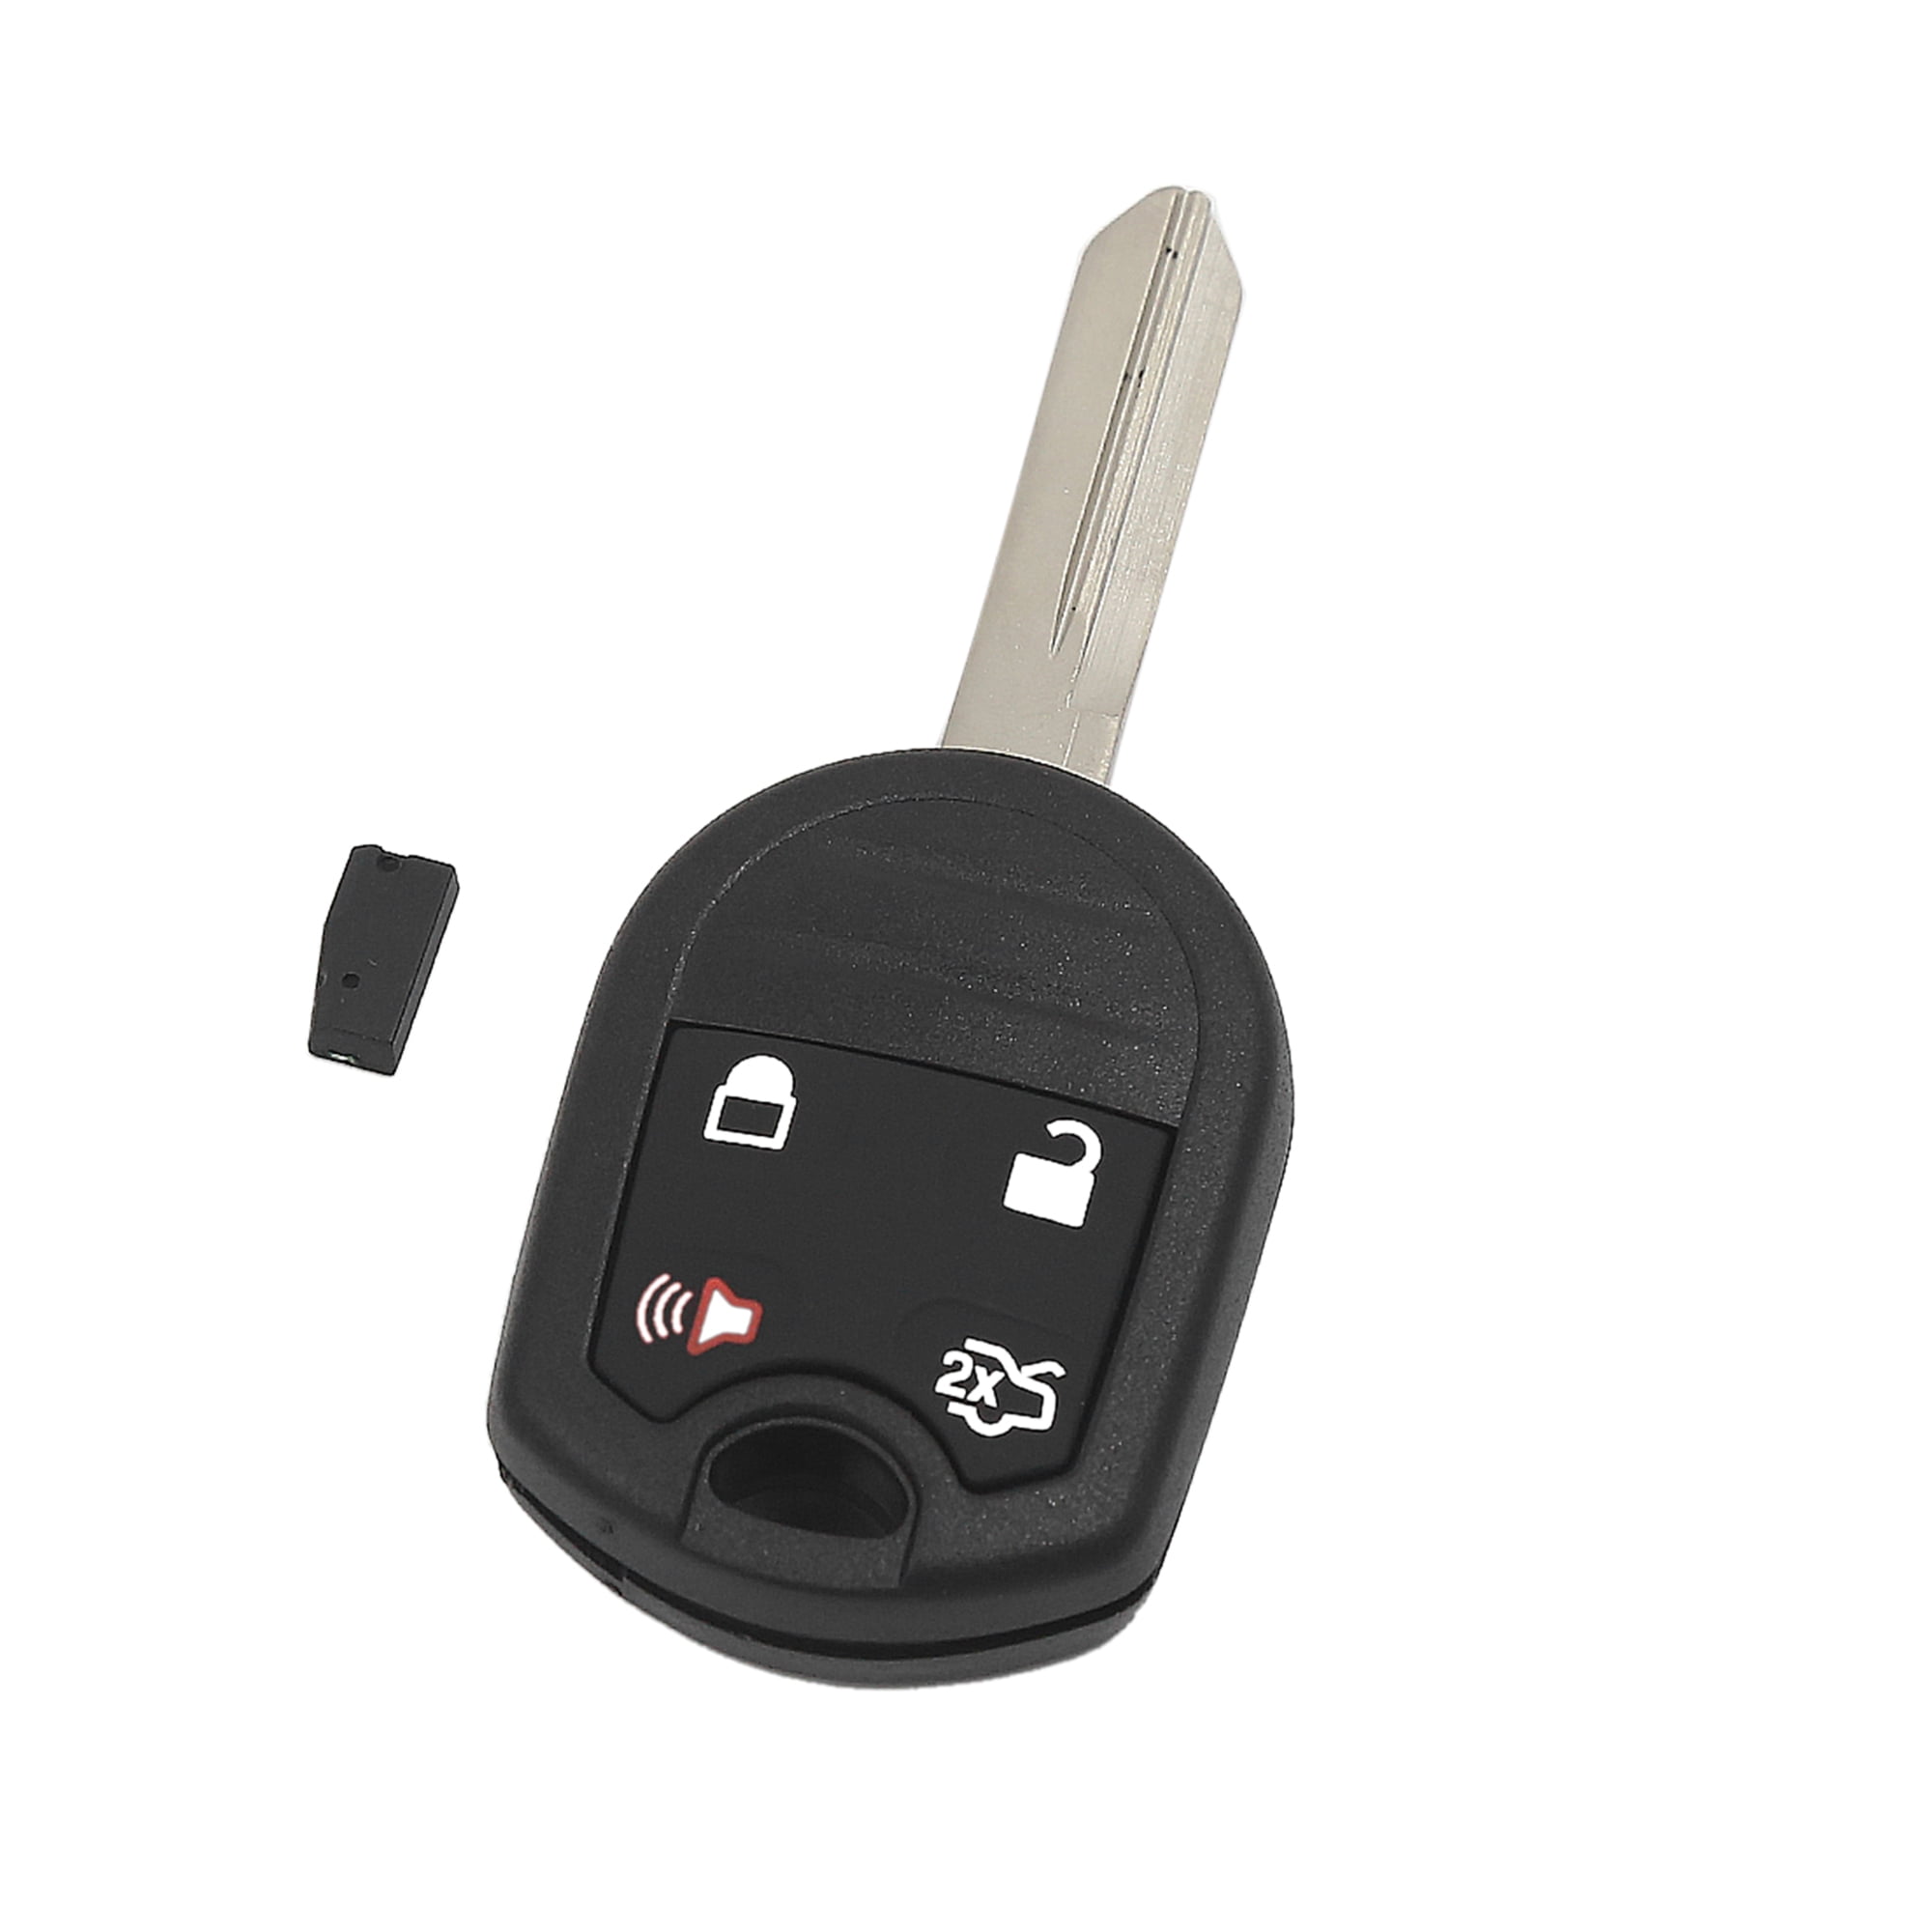 CWTWB1U793 5 Buttons 315 MHz Entry Remote Start Uncut Blank Car Ignition Key Fob Fit for Ford Edge Explorer Aupoko 2 PC Keyless Entry Remote Control 